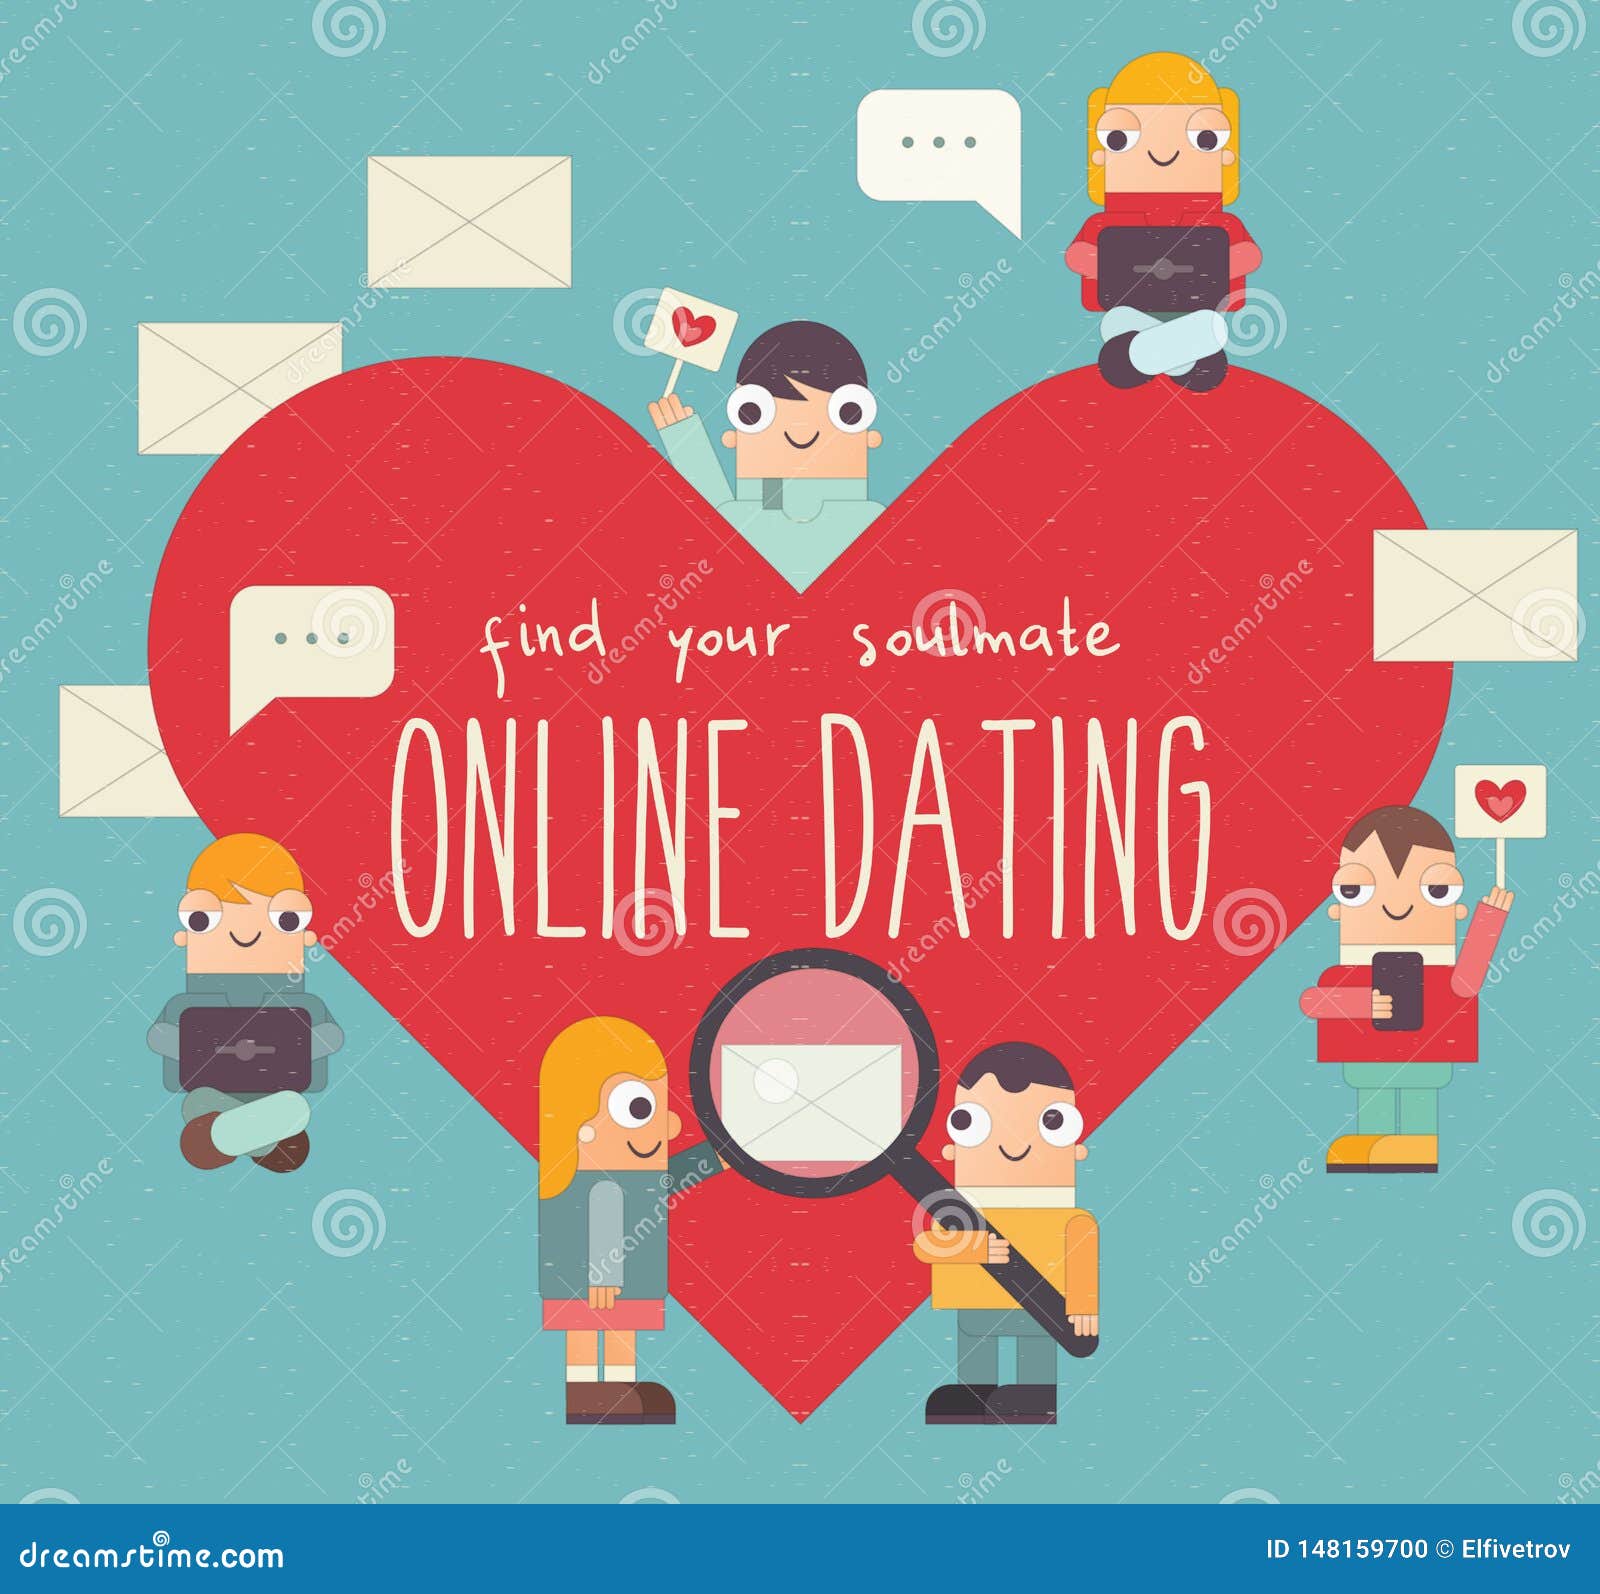 Dating Site Love Remote)